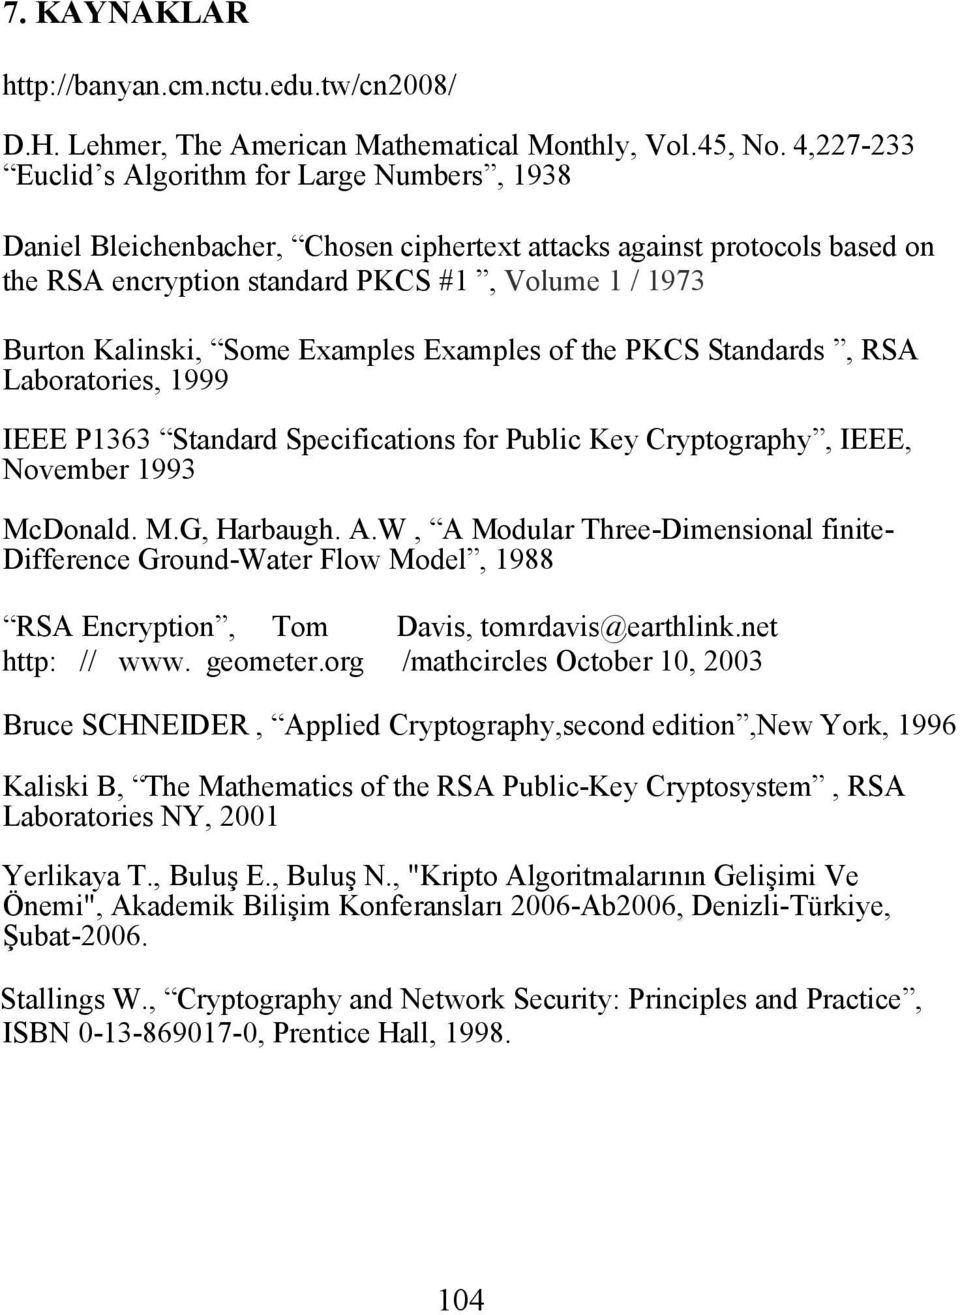 Some Examples Examples of the PKCS Standards, RSA Laboratories, 1999 IEEE P1363 Standard Specifications for Public Key Cryptography, IEEE, November 1993 McDonald. M.G, Harbaugh. A.